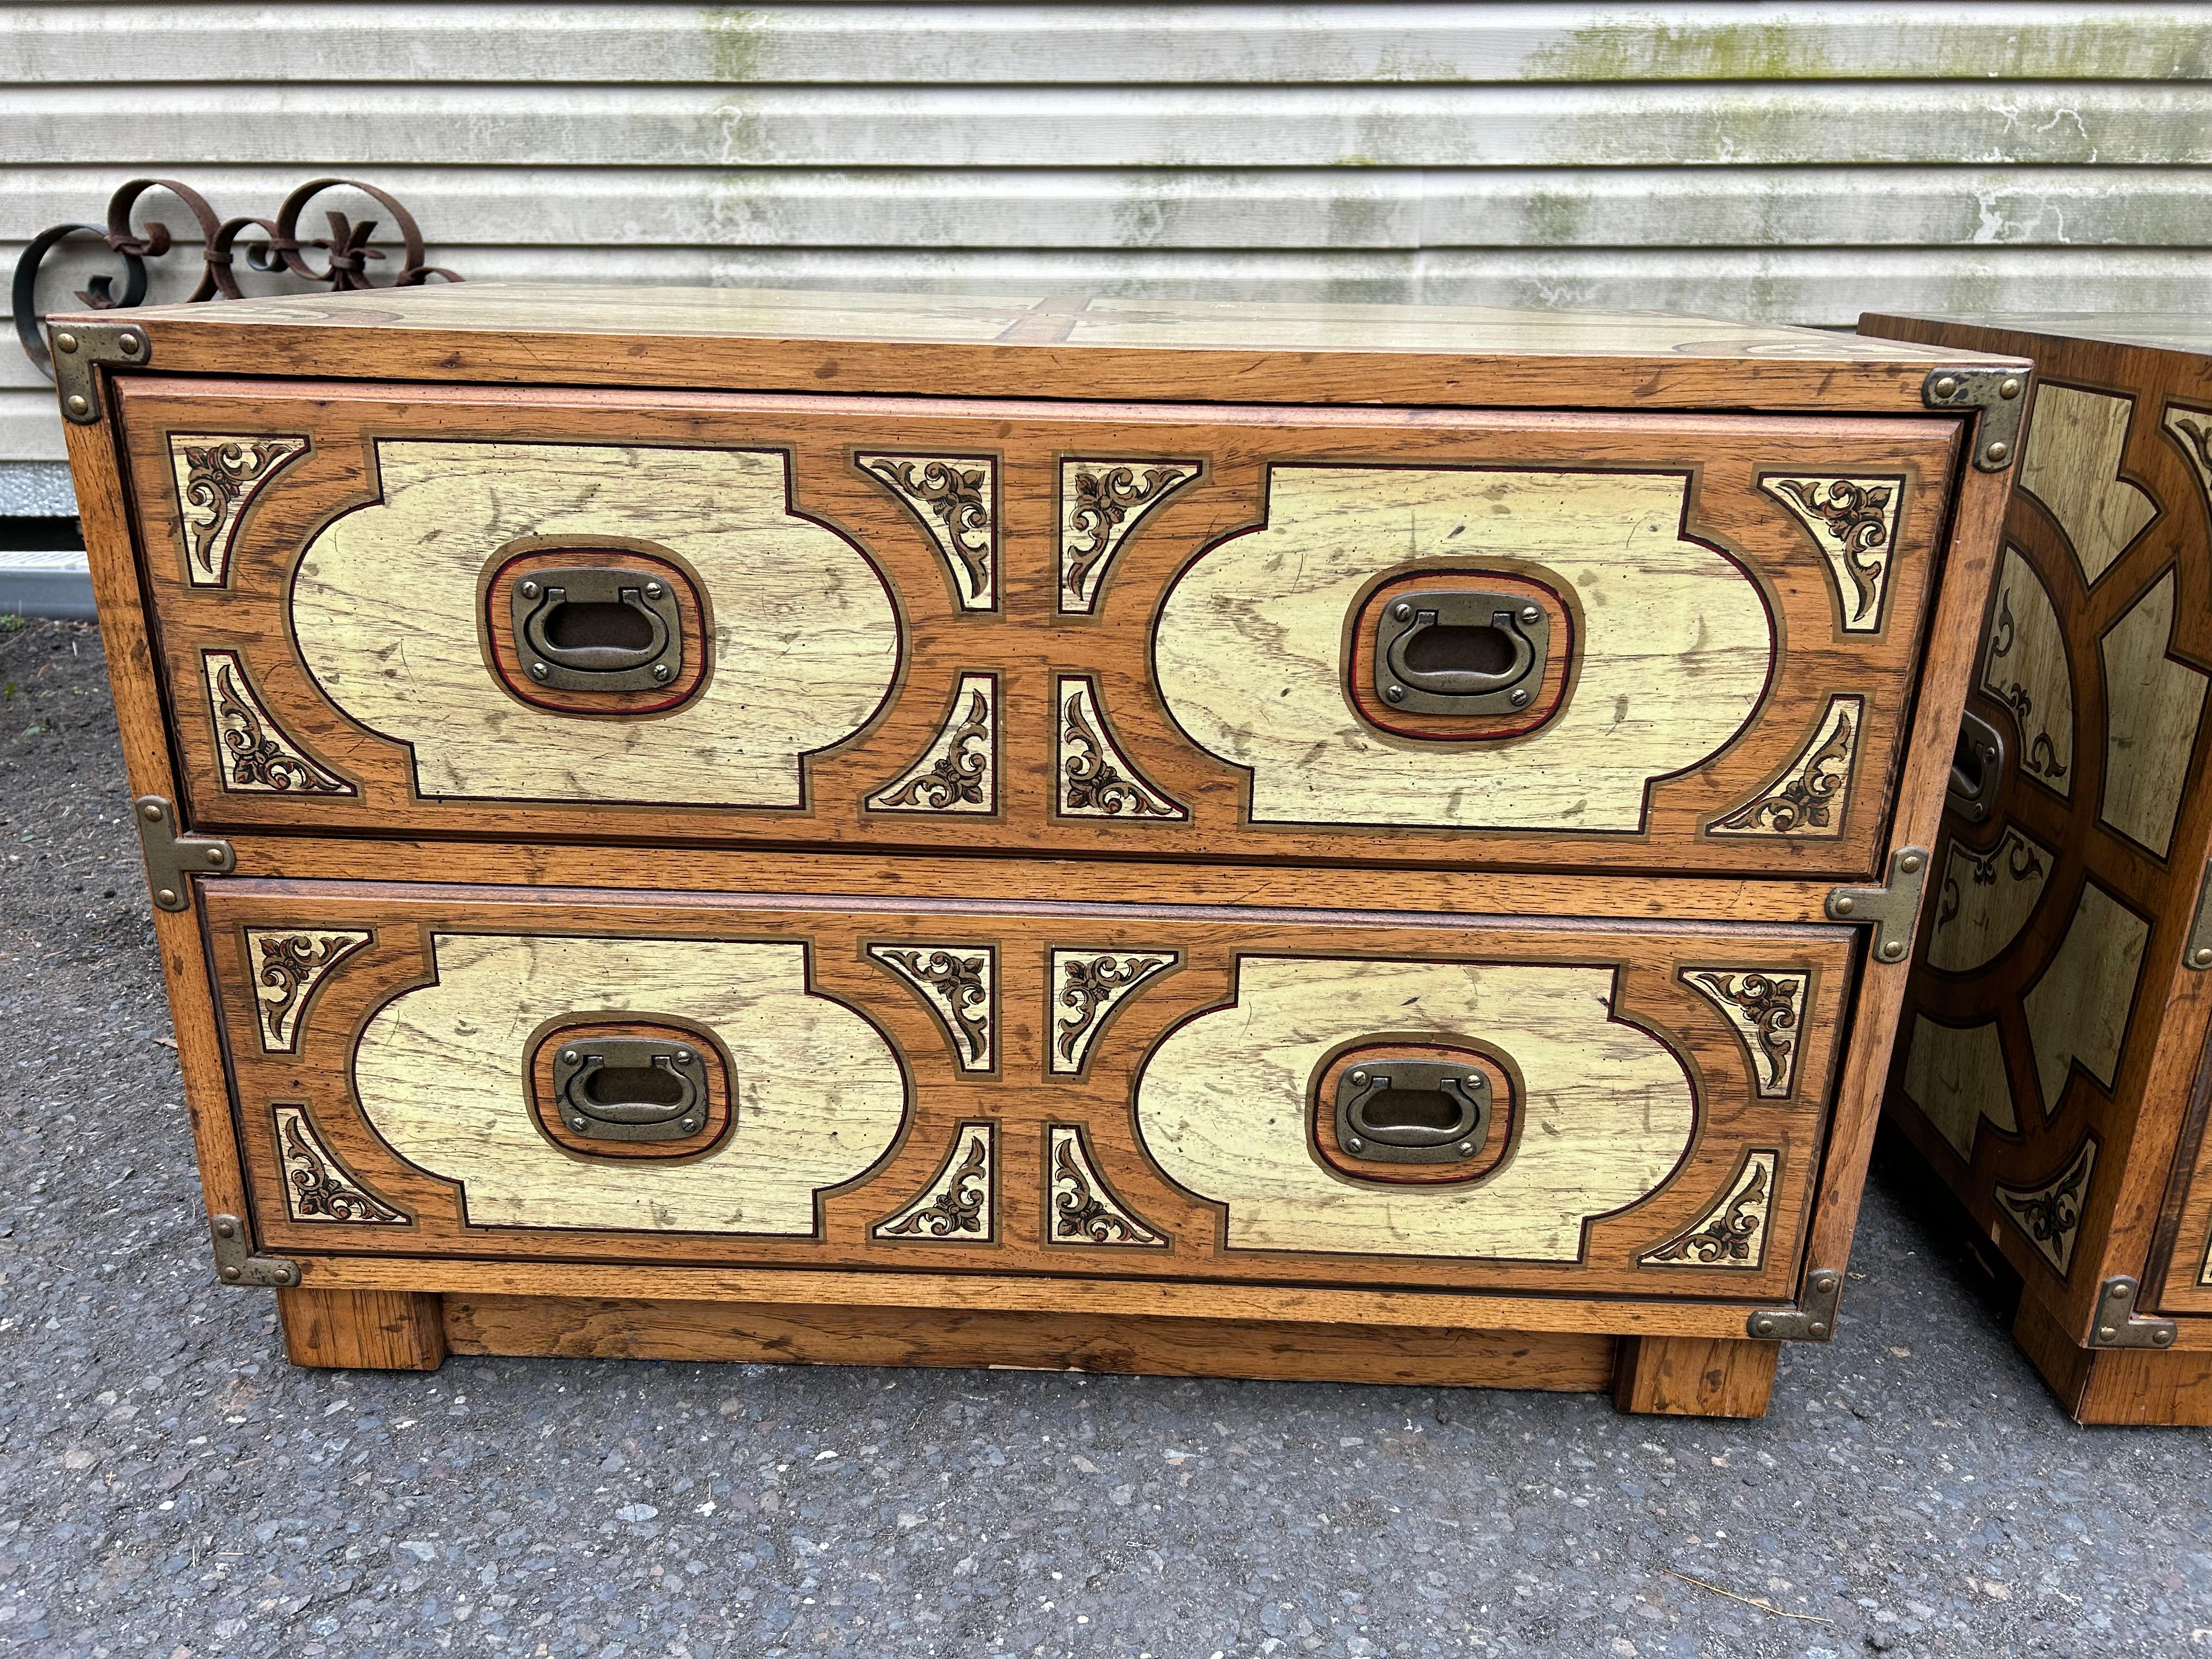 Fabulous pair of extremely rare Campaign chests by Drexel for the Oxford Square Collection.  We just love the unusual patterns on all sides done with different colored stains and painted details.  We have never seen another pair come to the